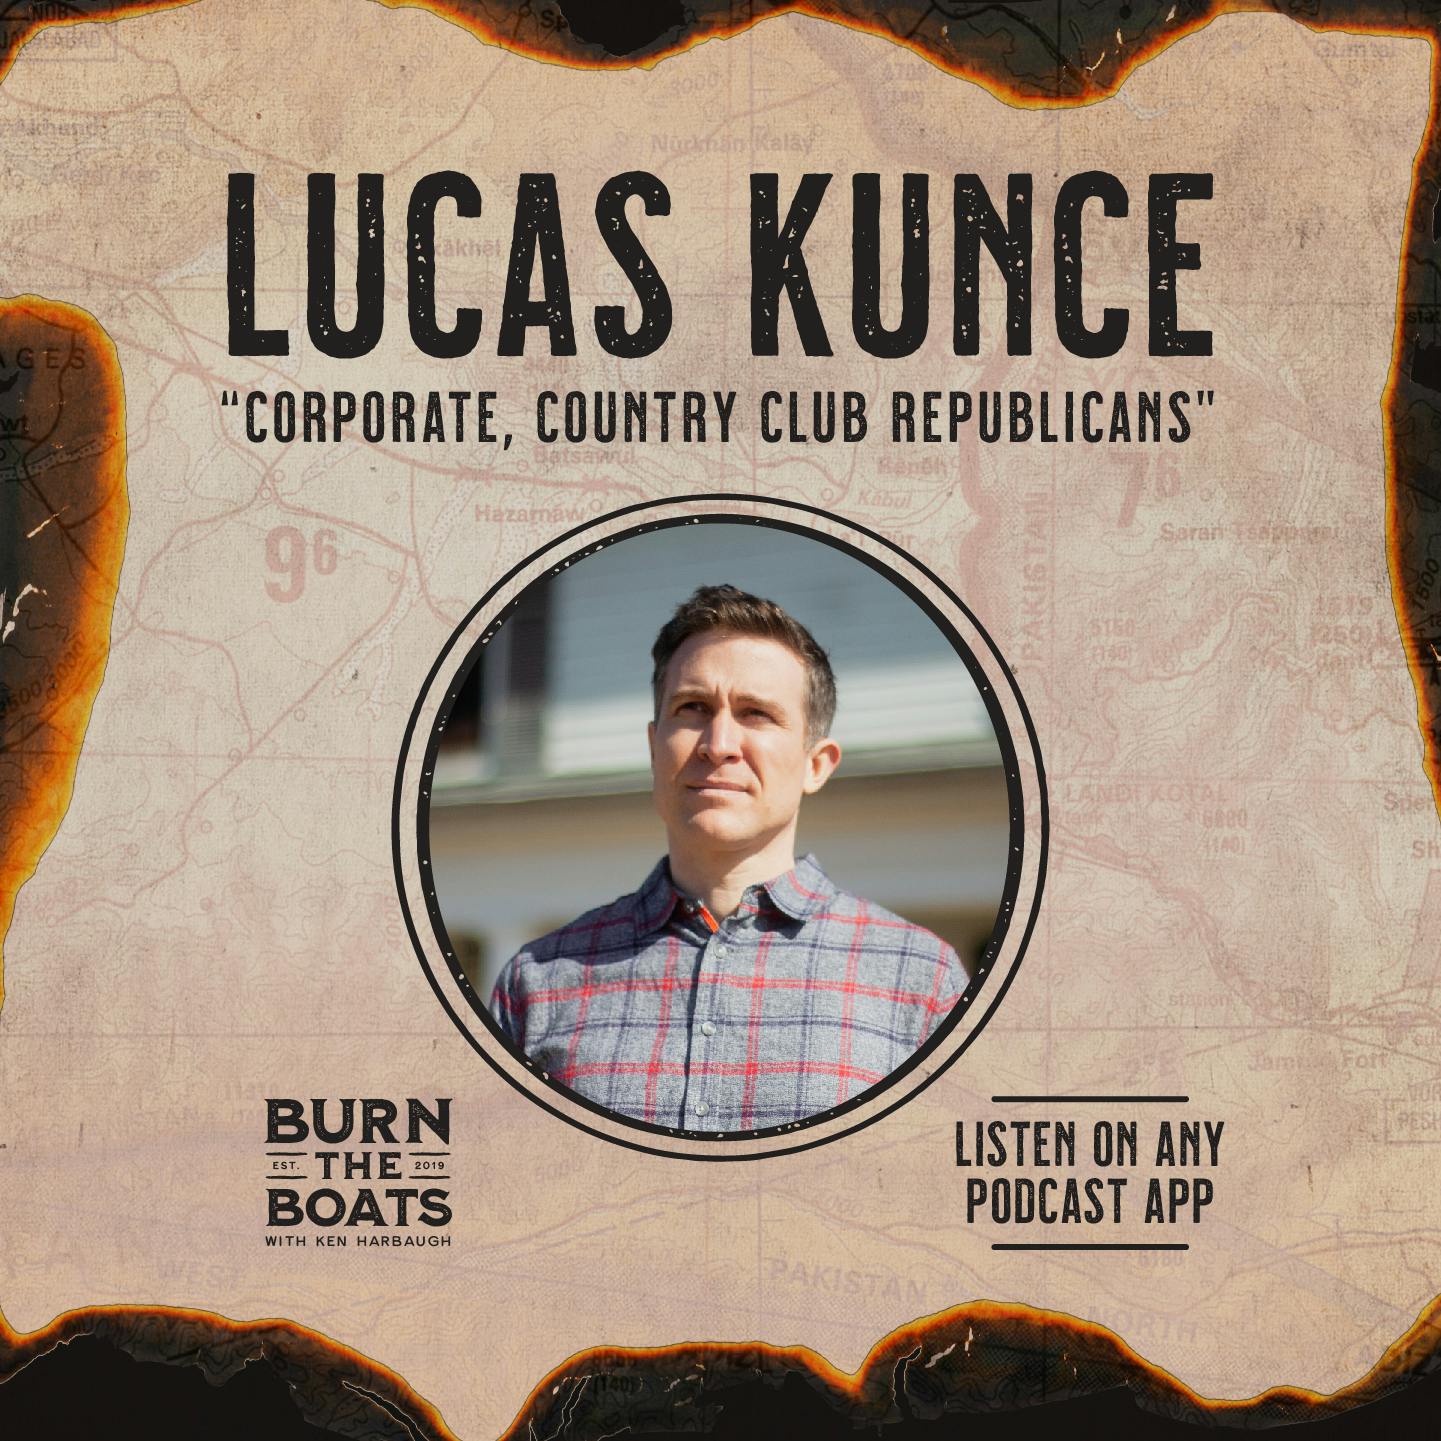 Lucas Kunce: “Corporate, Country Club Republicans”